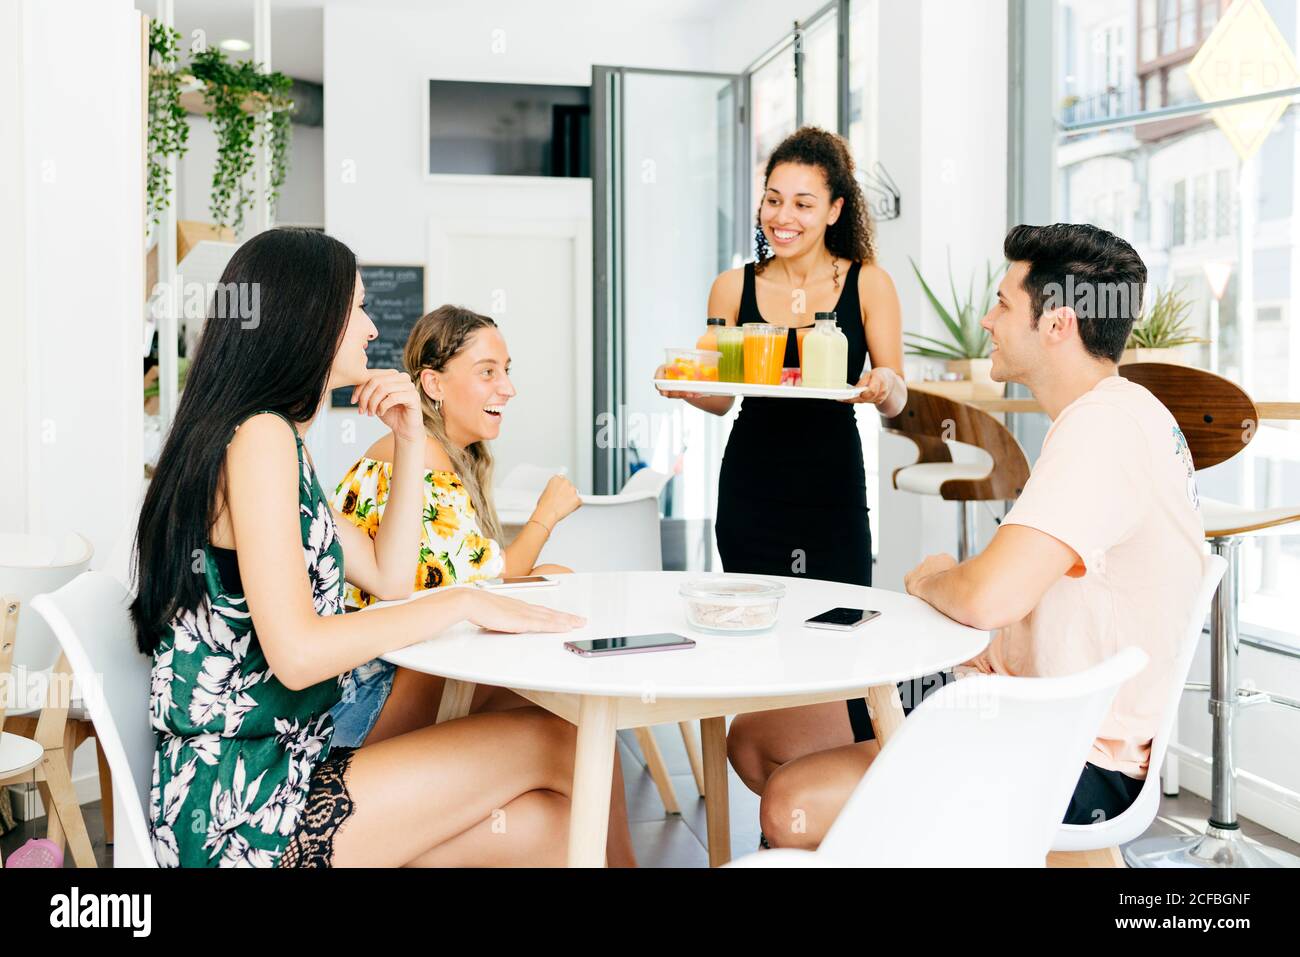 Cheerful waitress serving healthy drinks for friends Stock Photo